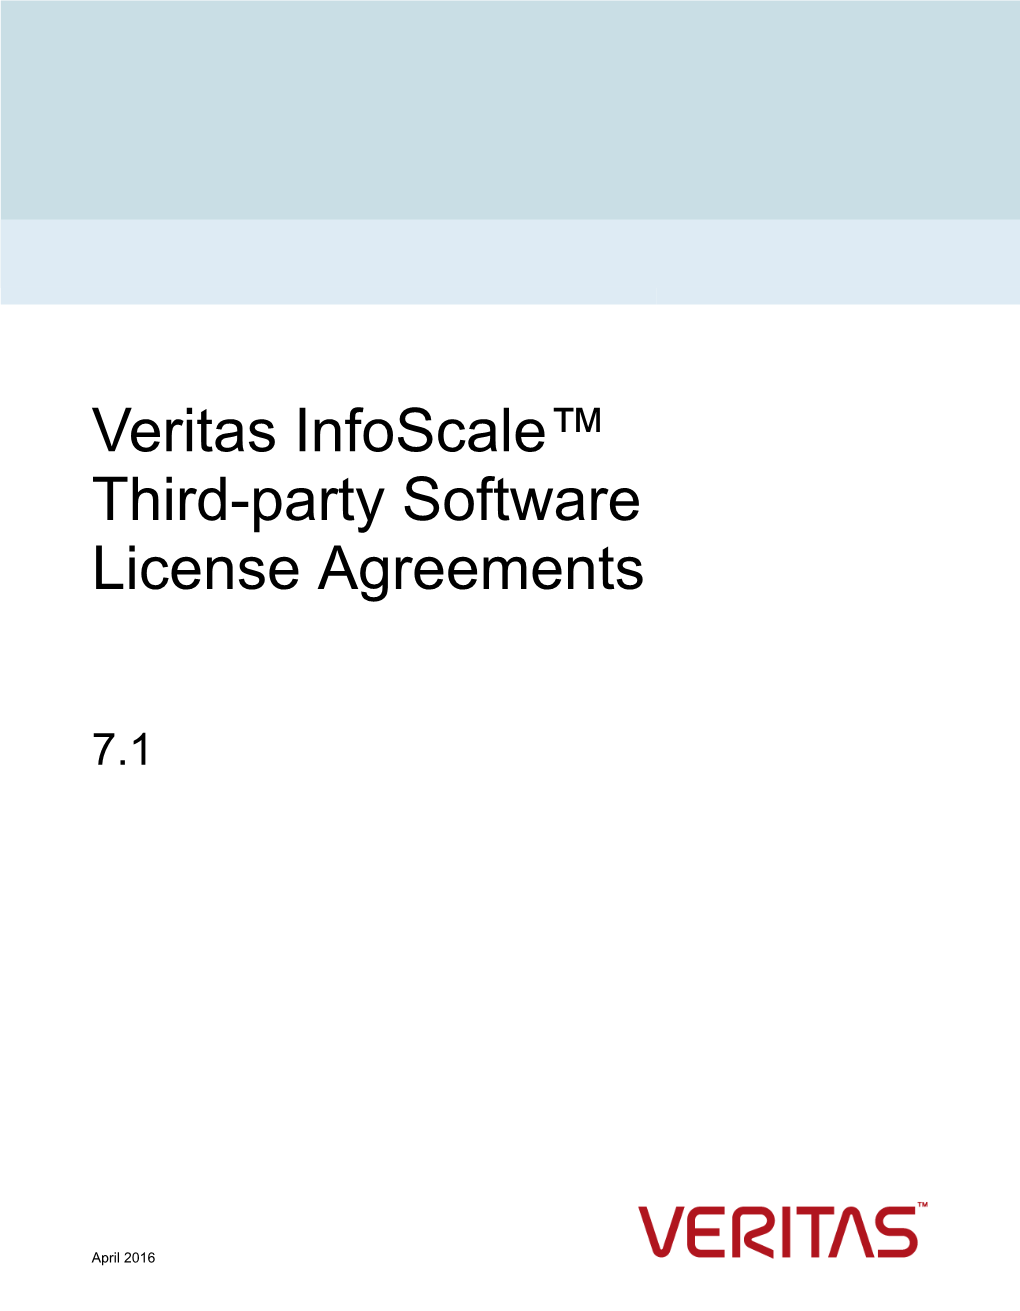 Veritas Infoscale Third-Party Software License Agreements